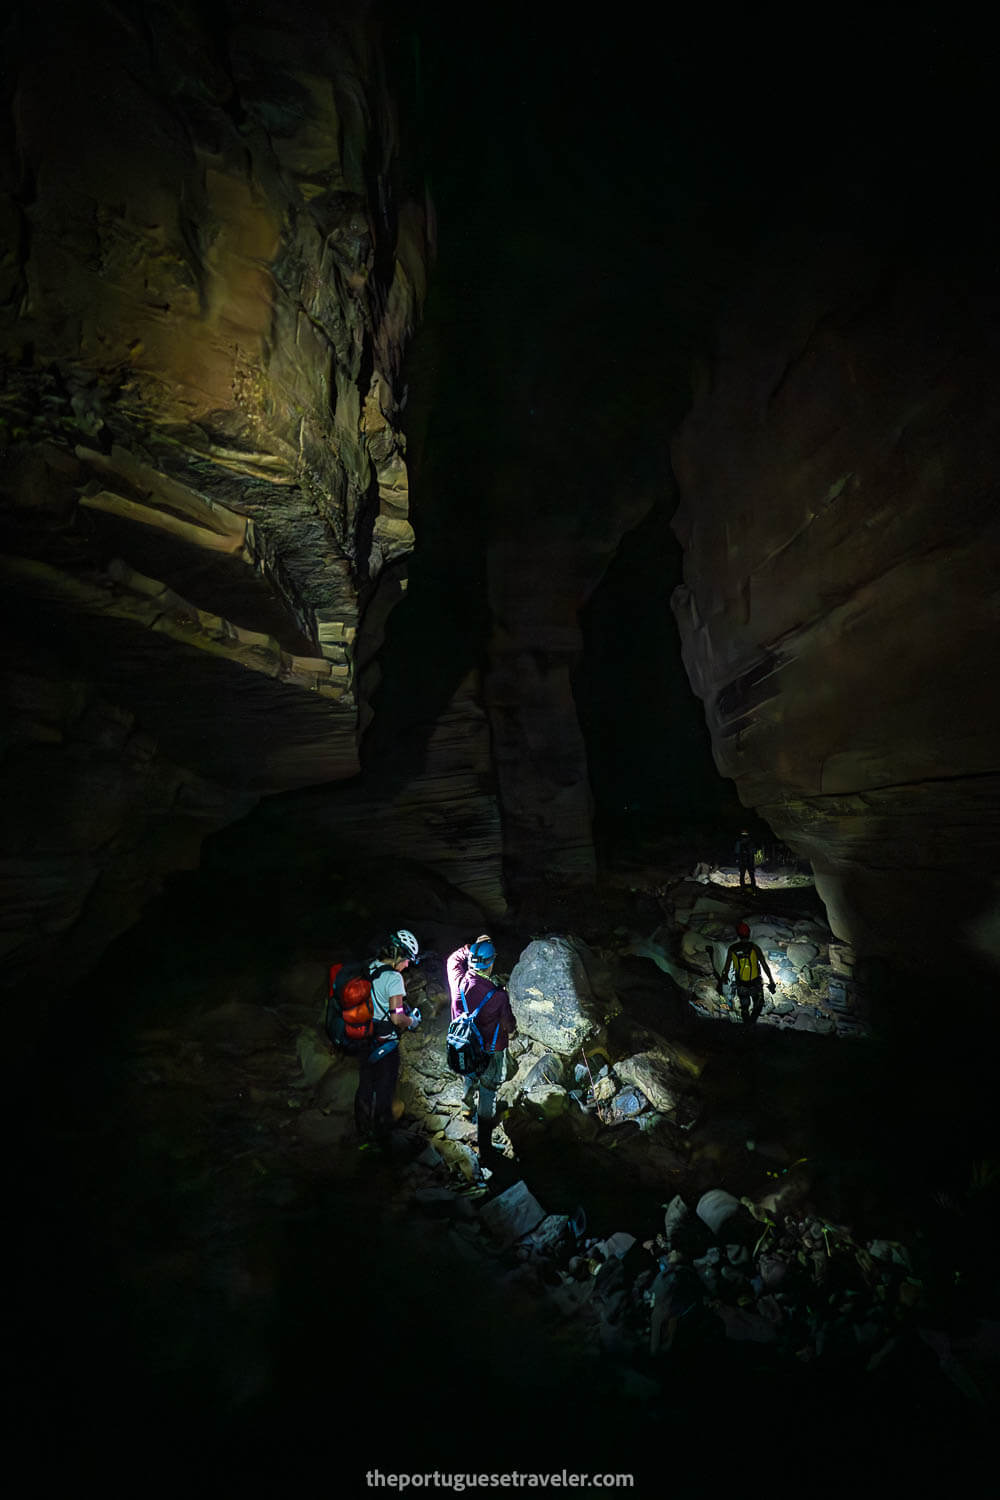 The first few meters of cave exploration